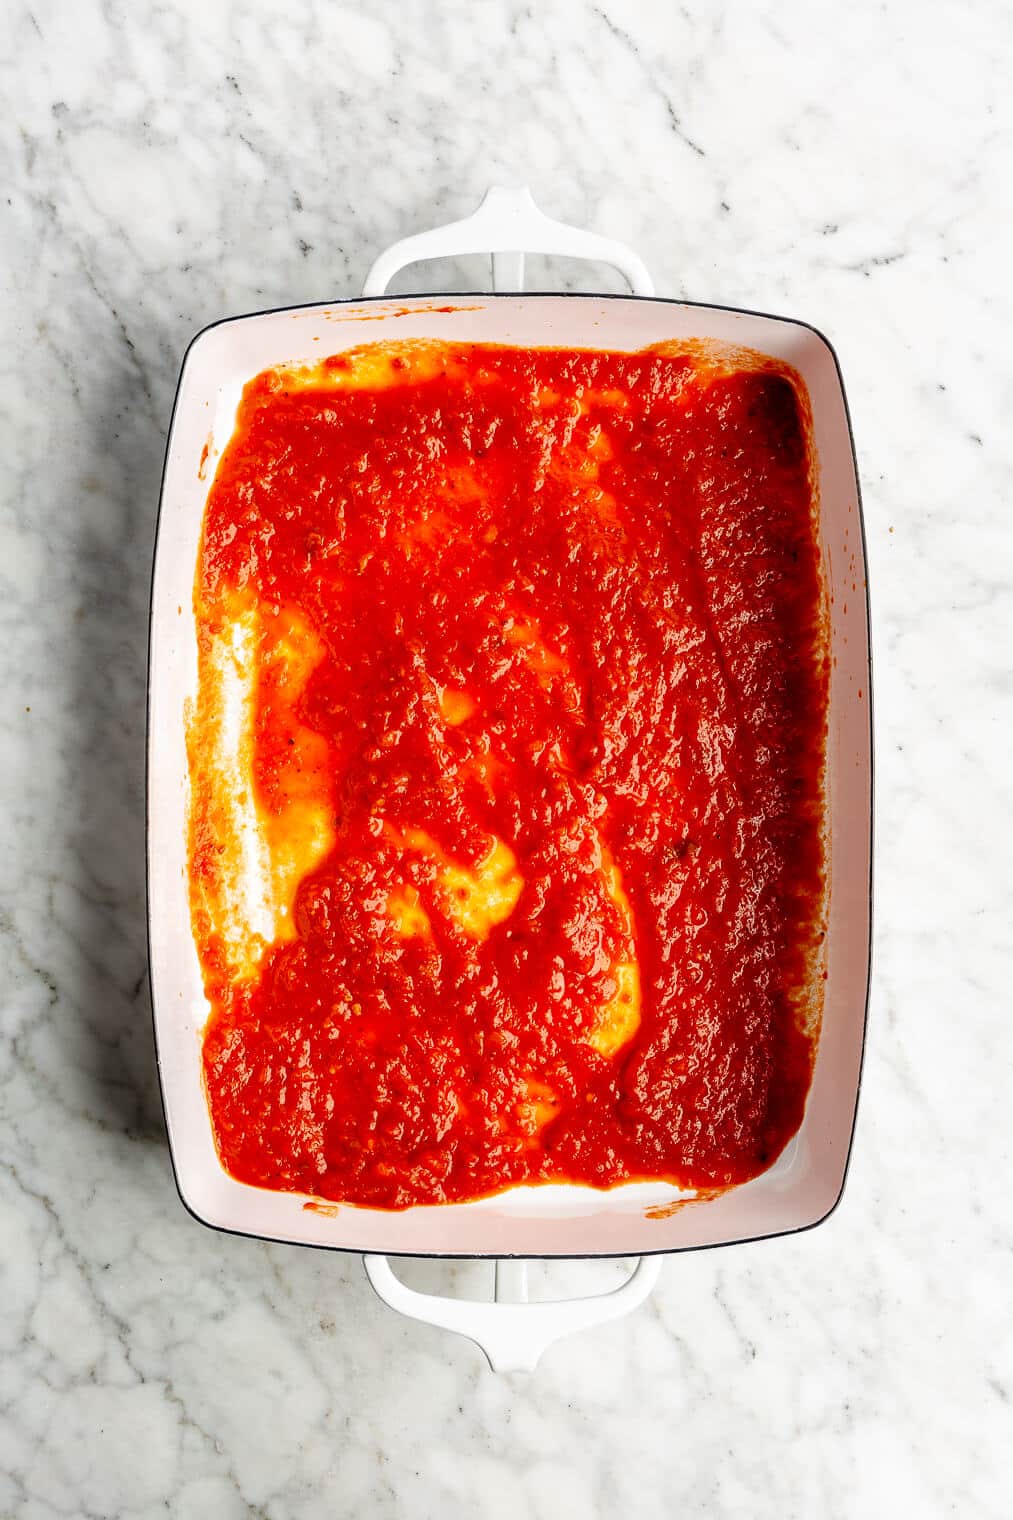 Top view of a casserole dish with marinara sauce spread in an even layer on the bottom.